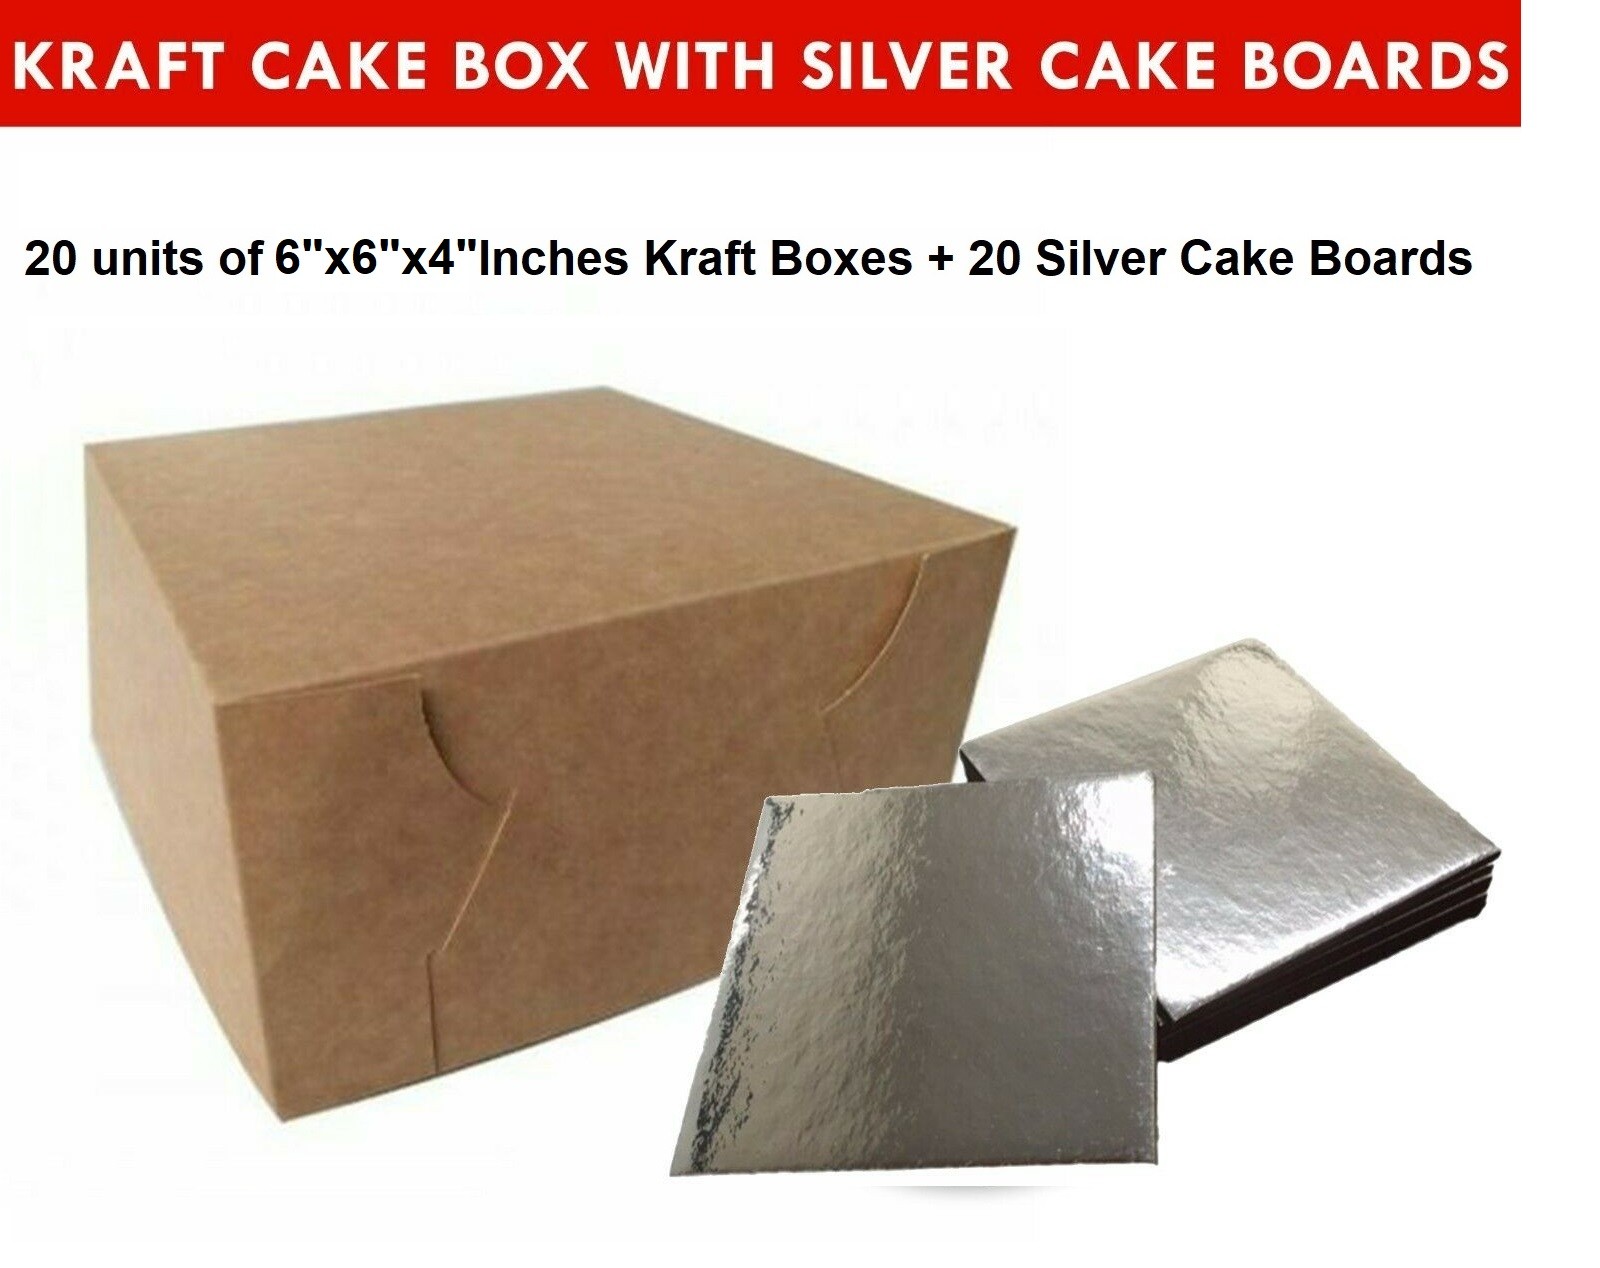 Kraft Cake Boxes with Square boards - 8" x 8" x 4" ($3.6 /pc x 20 units)